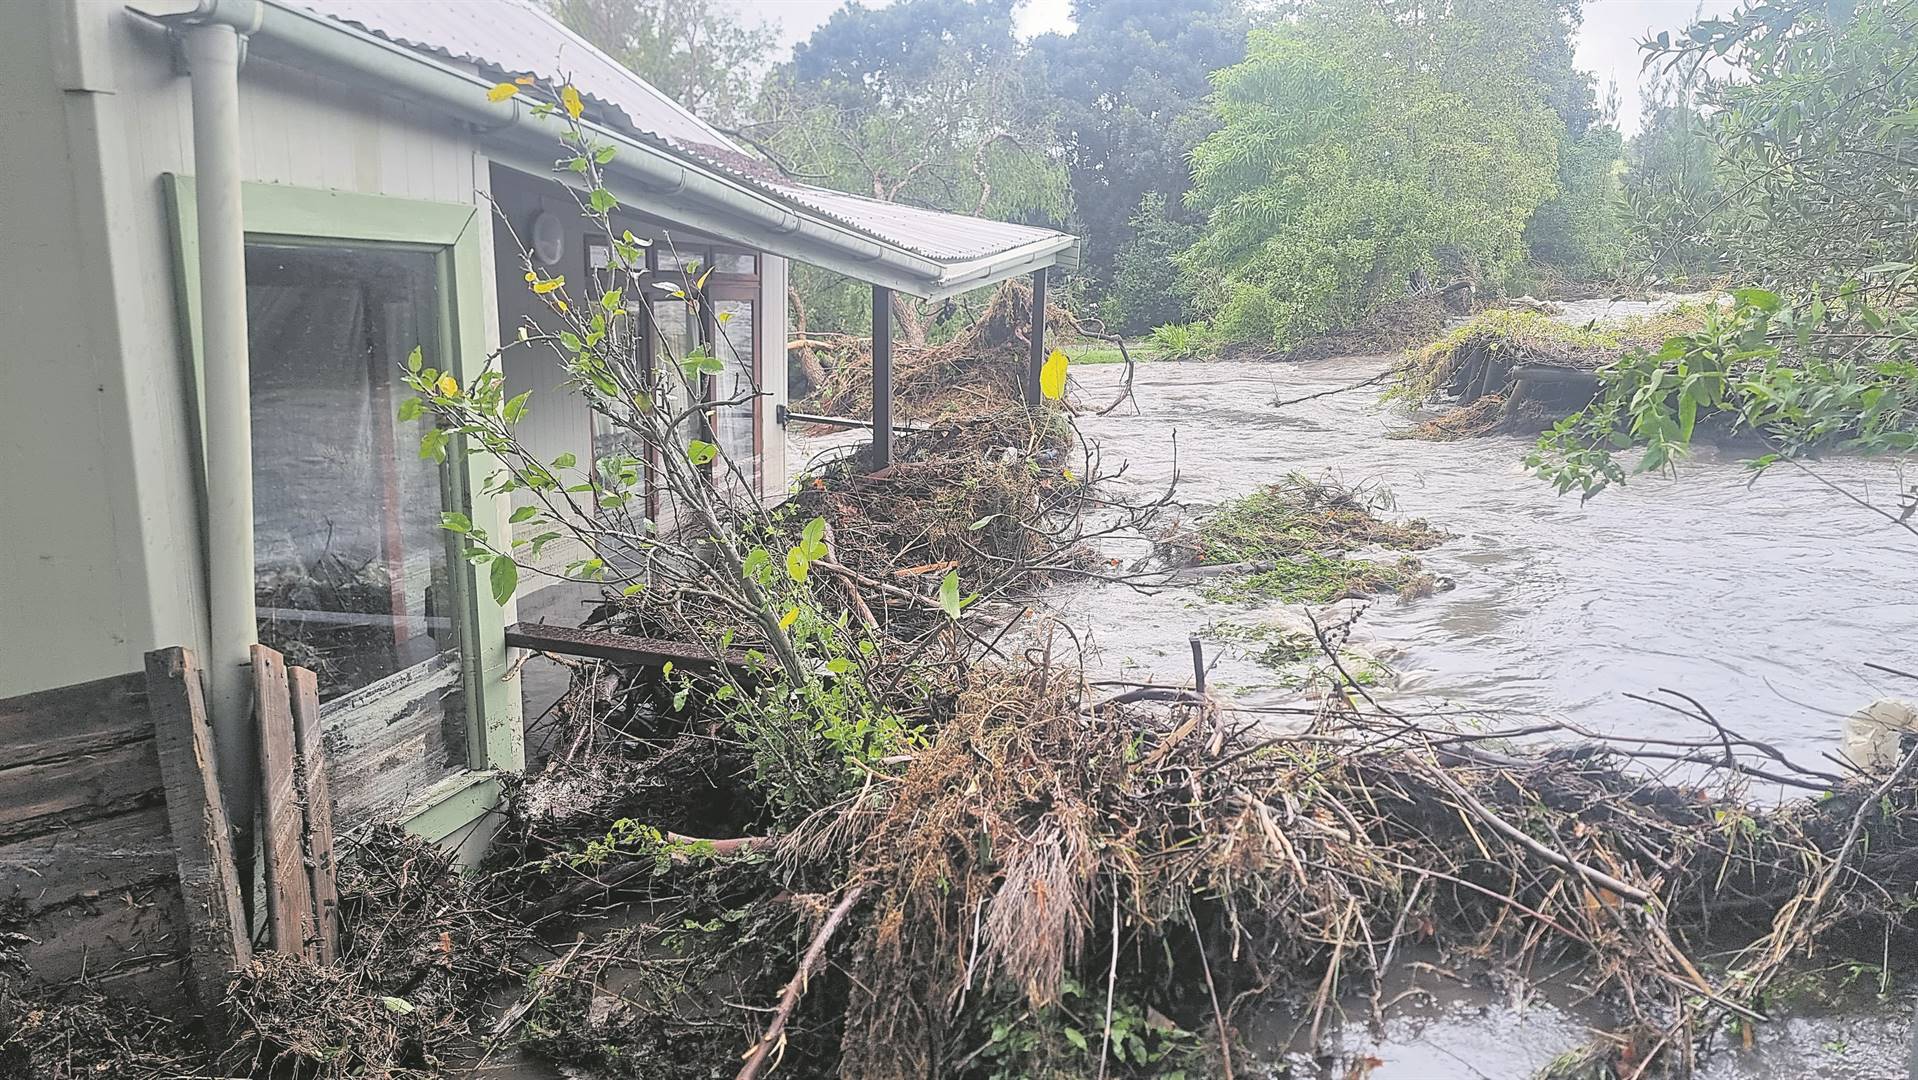 Legal action may loom against the City of Cape Town concerning damage caused by last year’s floods.Photo: Jonathan Schrire